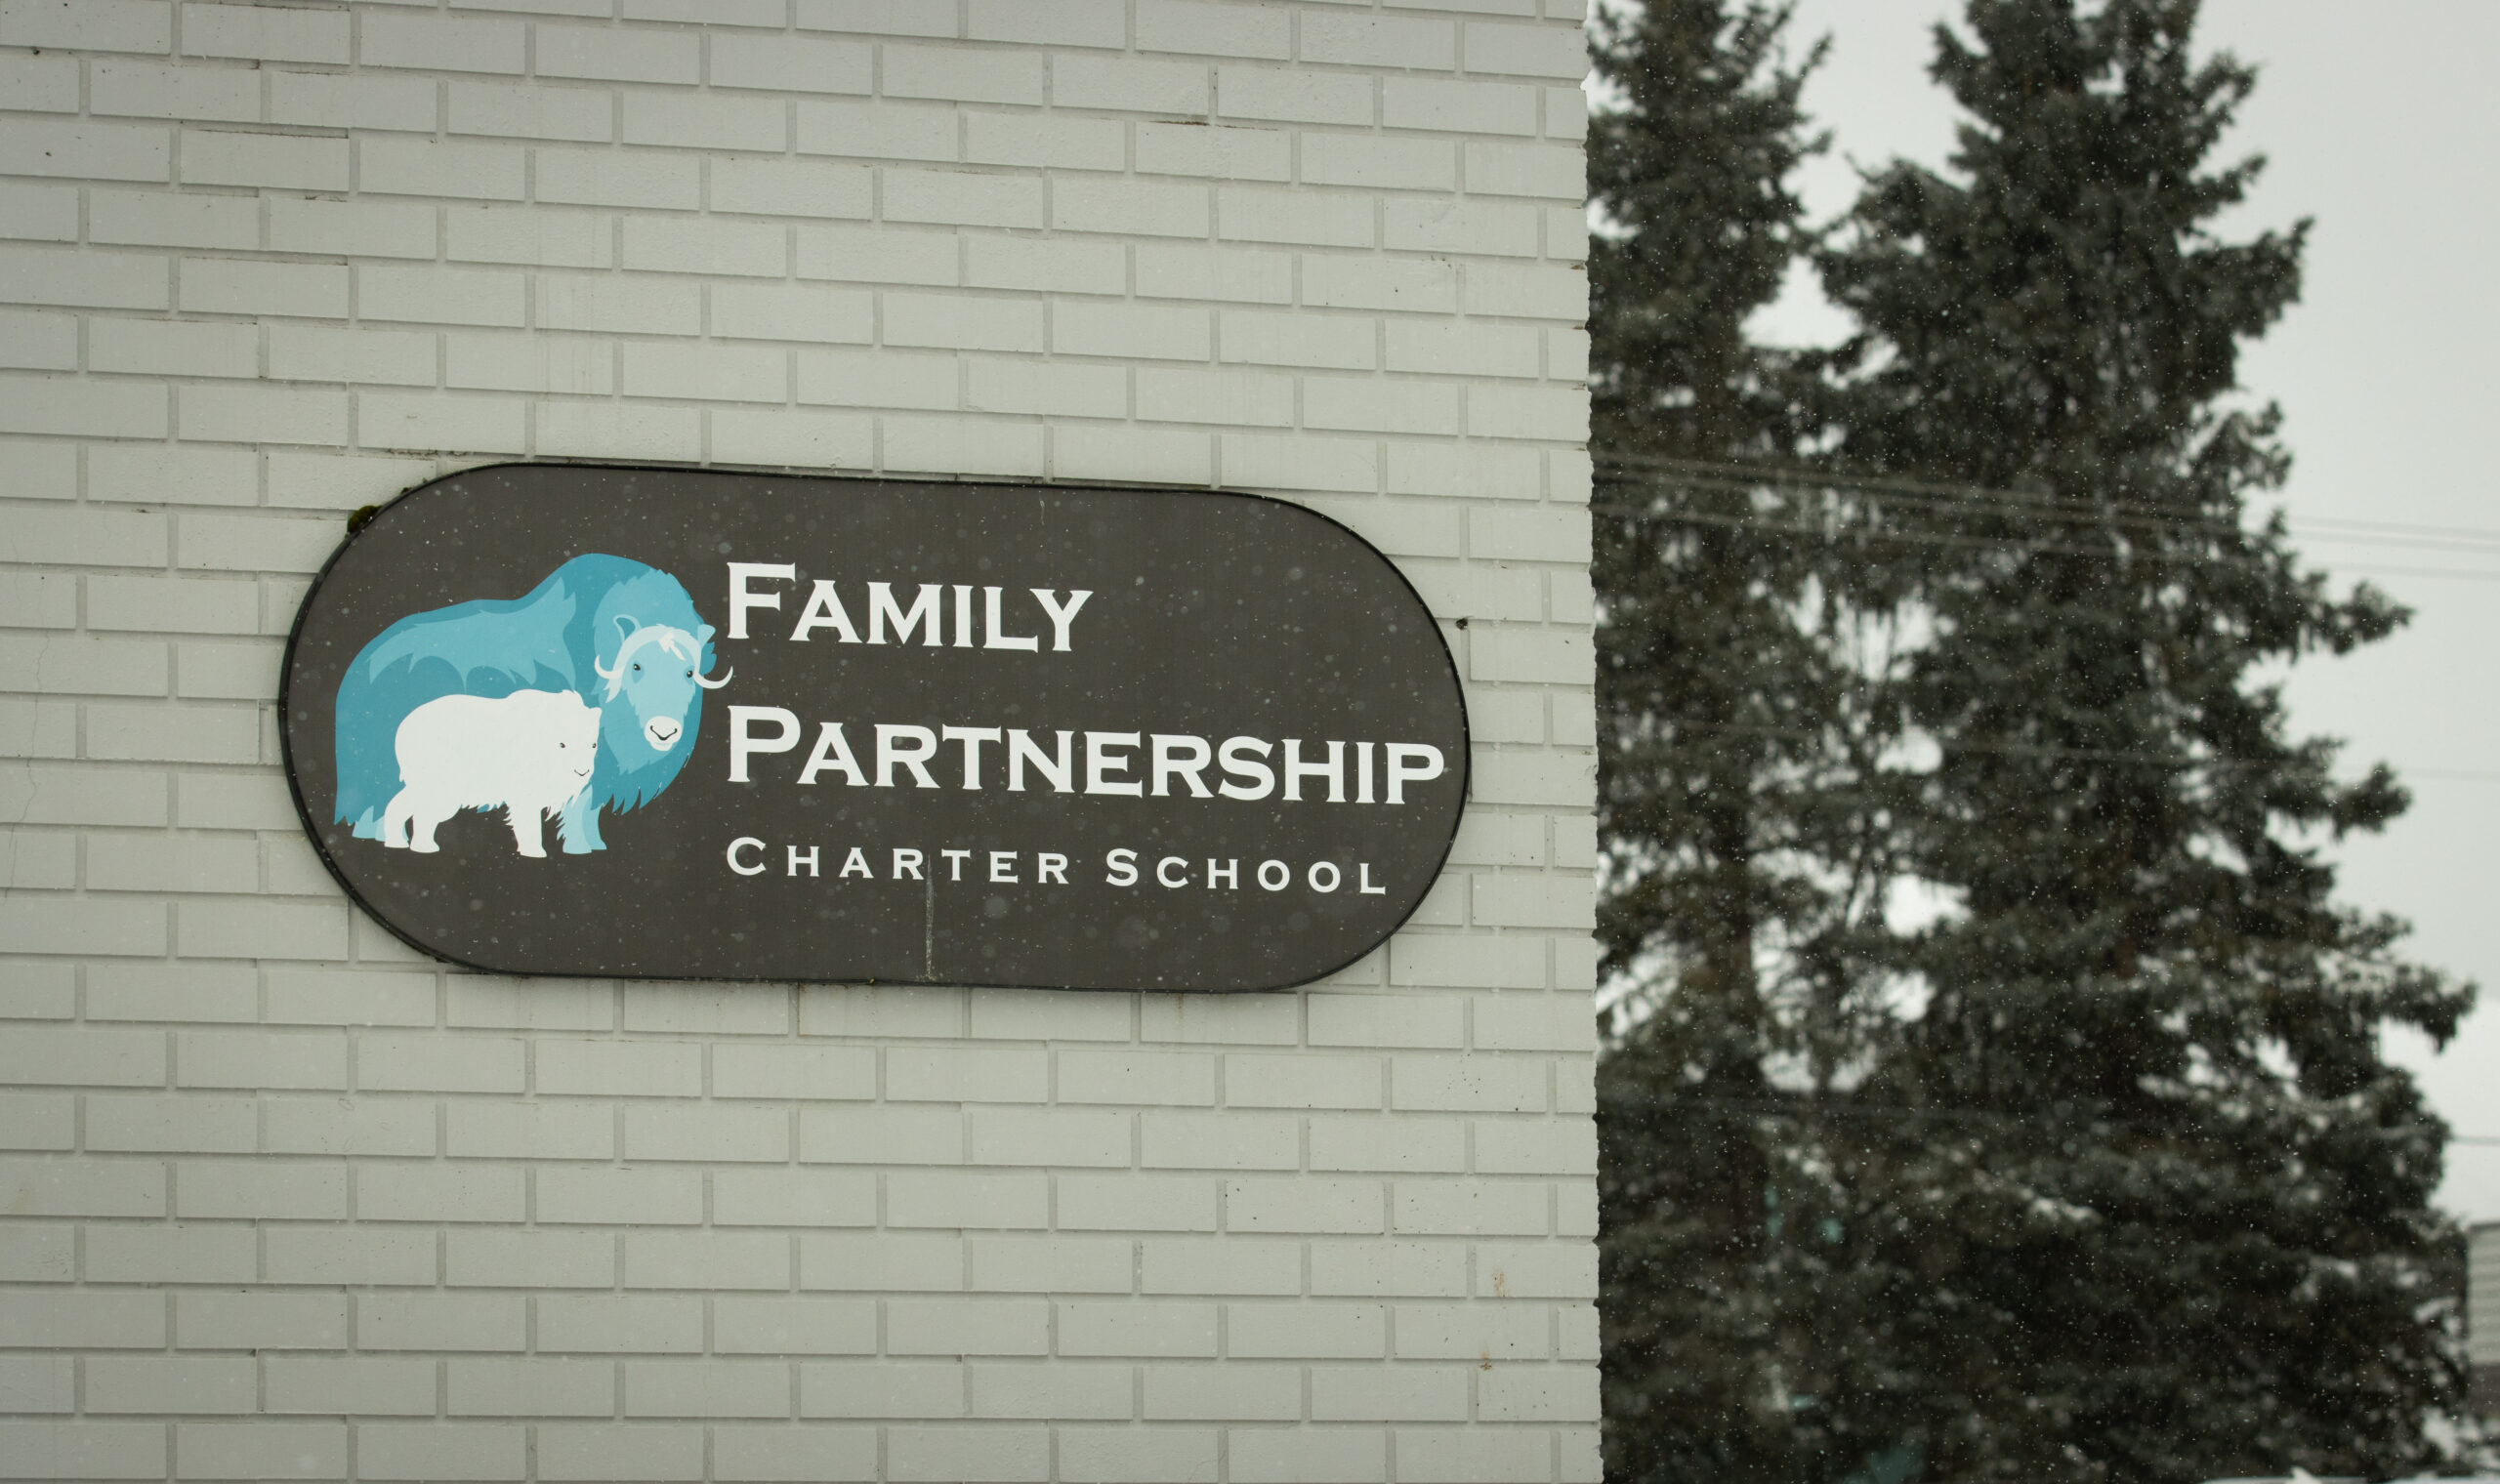 Anchorage School District revokes charter of Family Partnership Charter